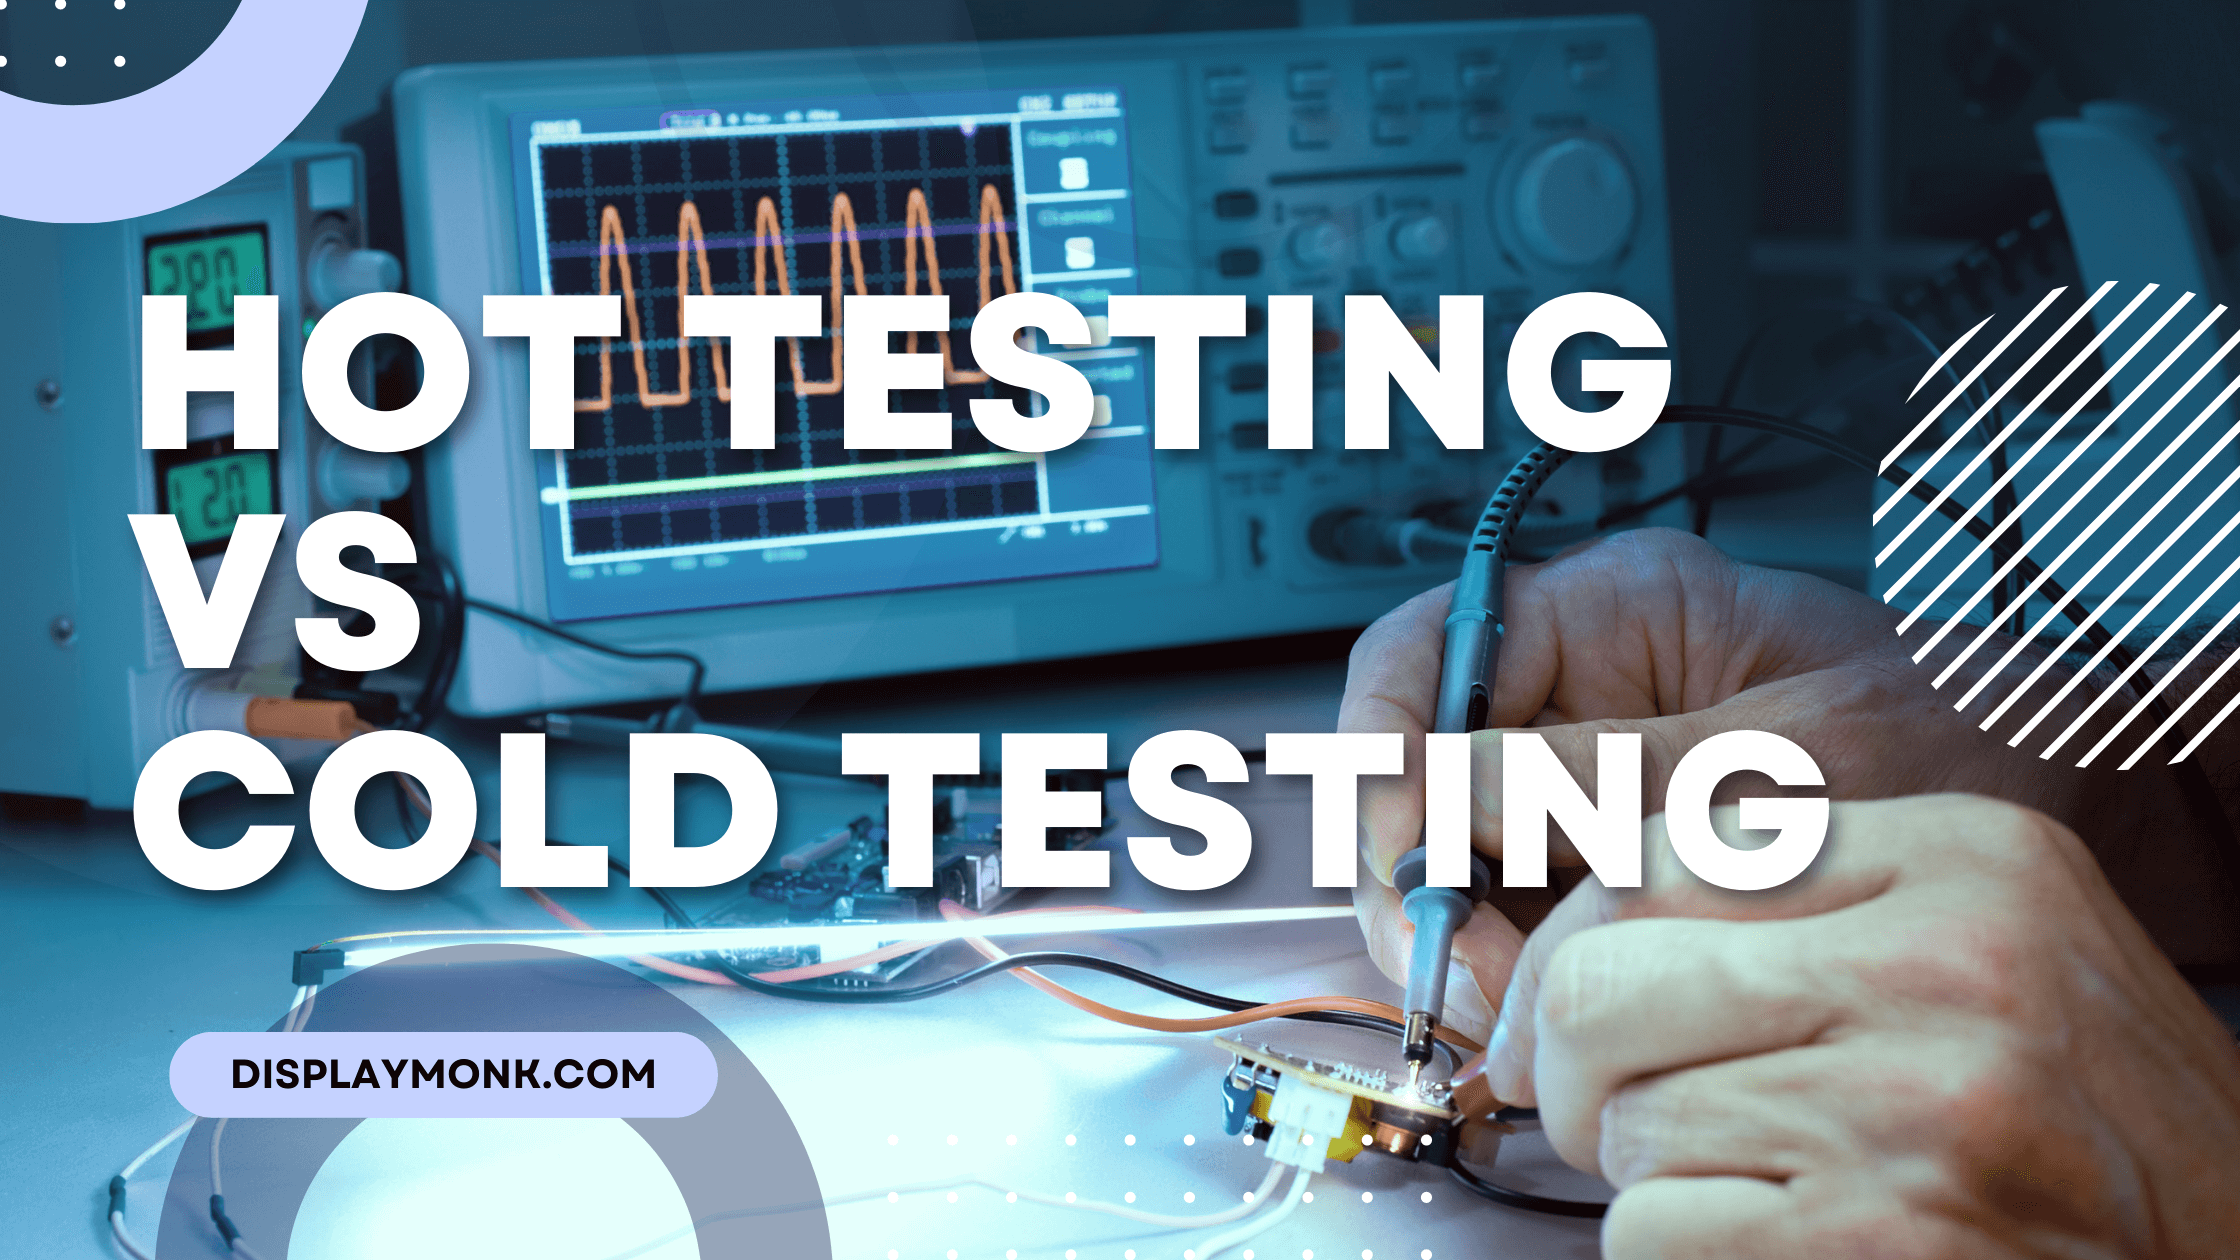 What is Hot Testing vs Cold Testing In Laptop / Mobile